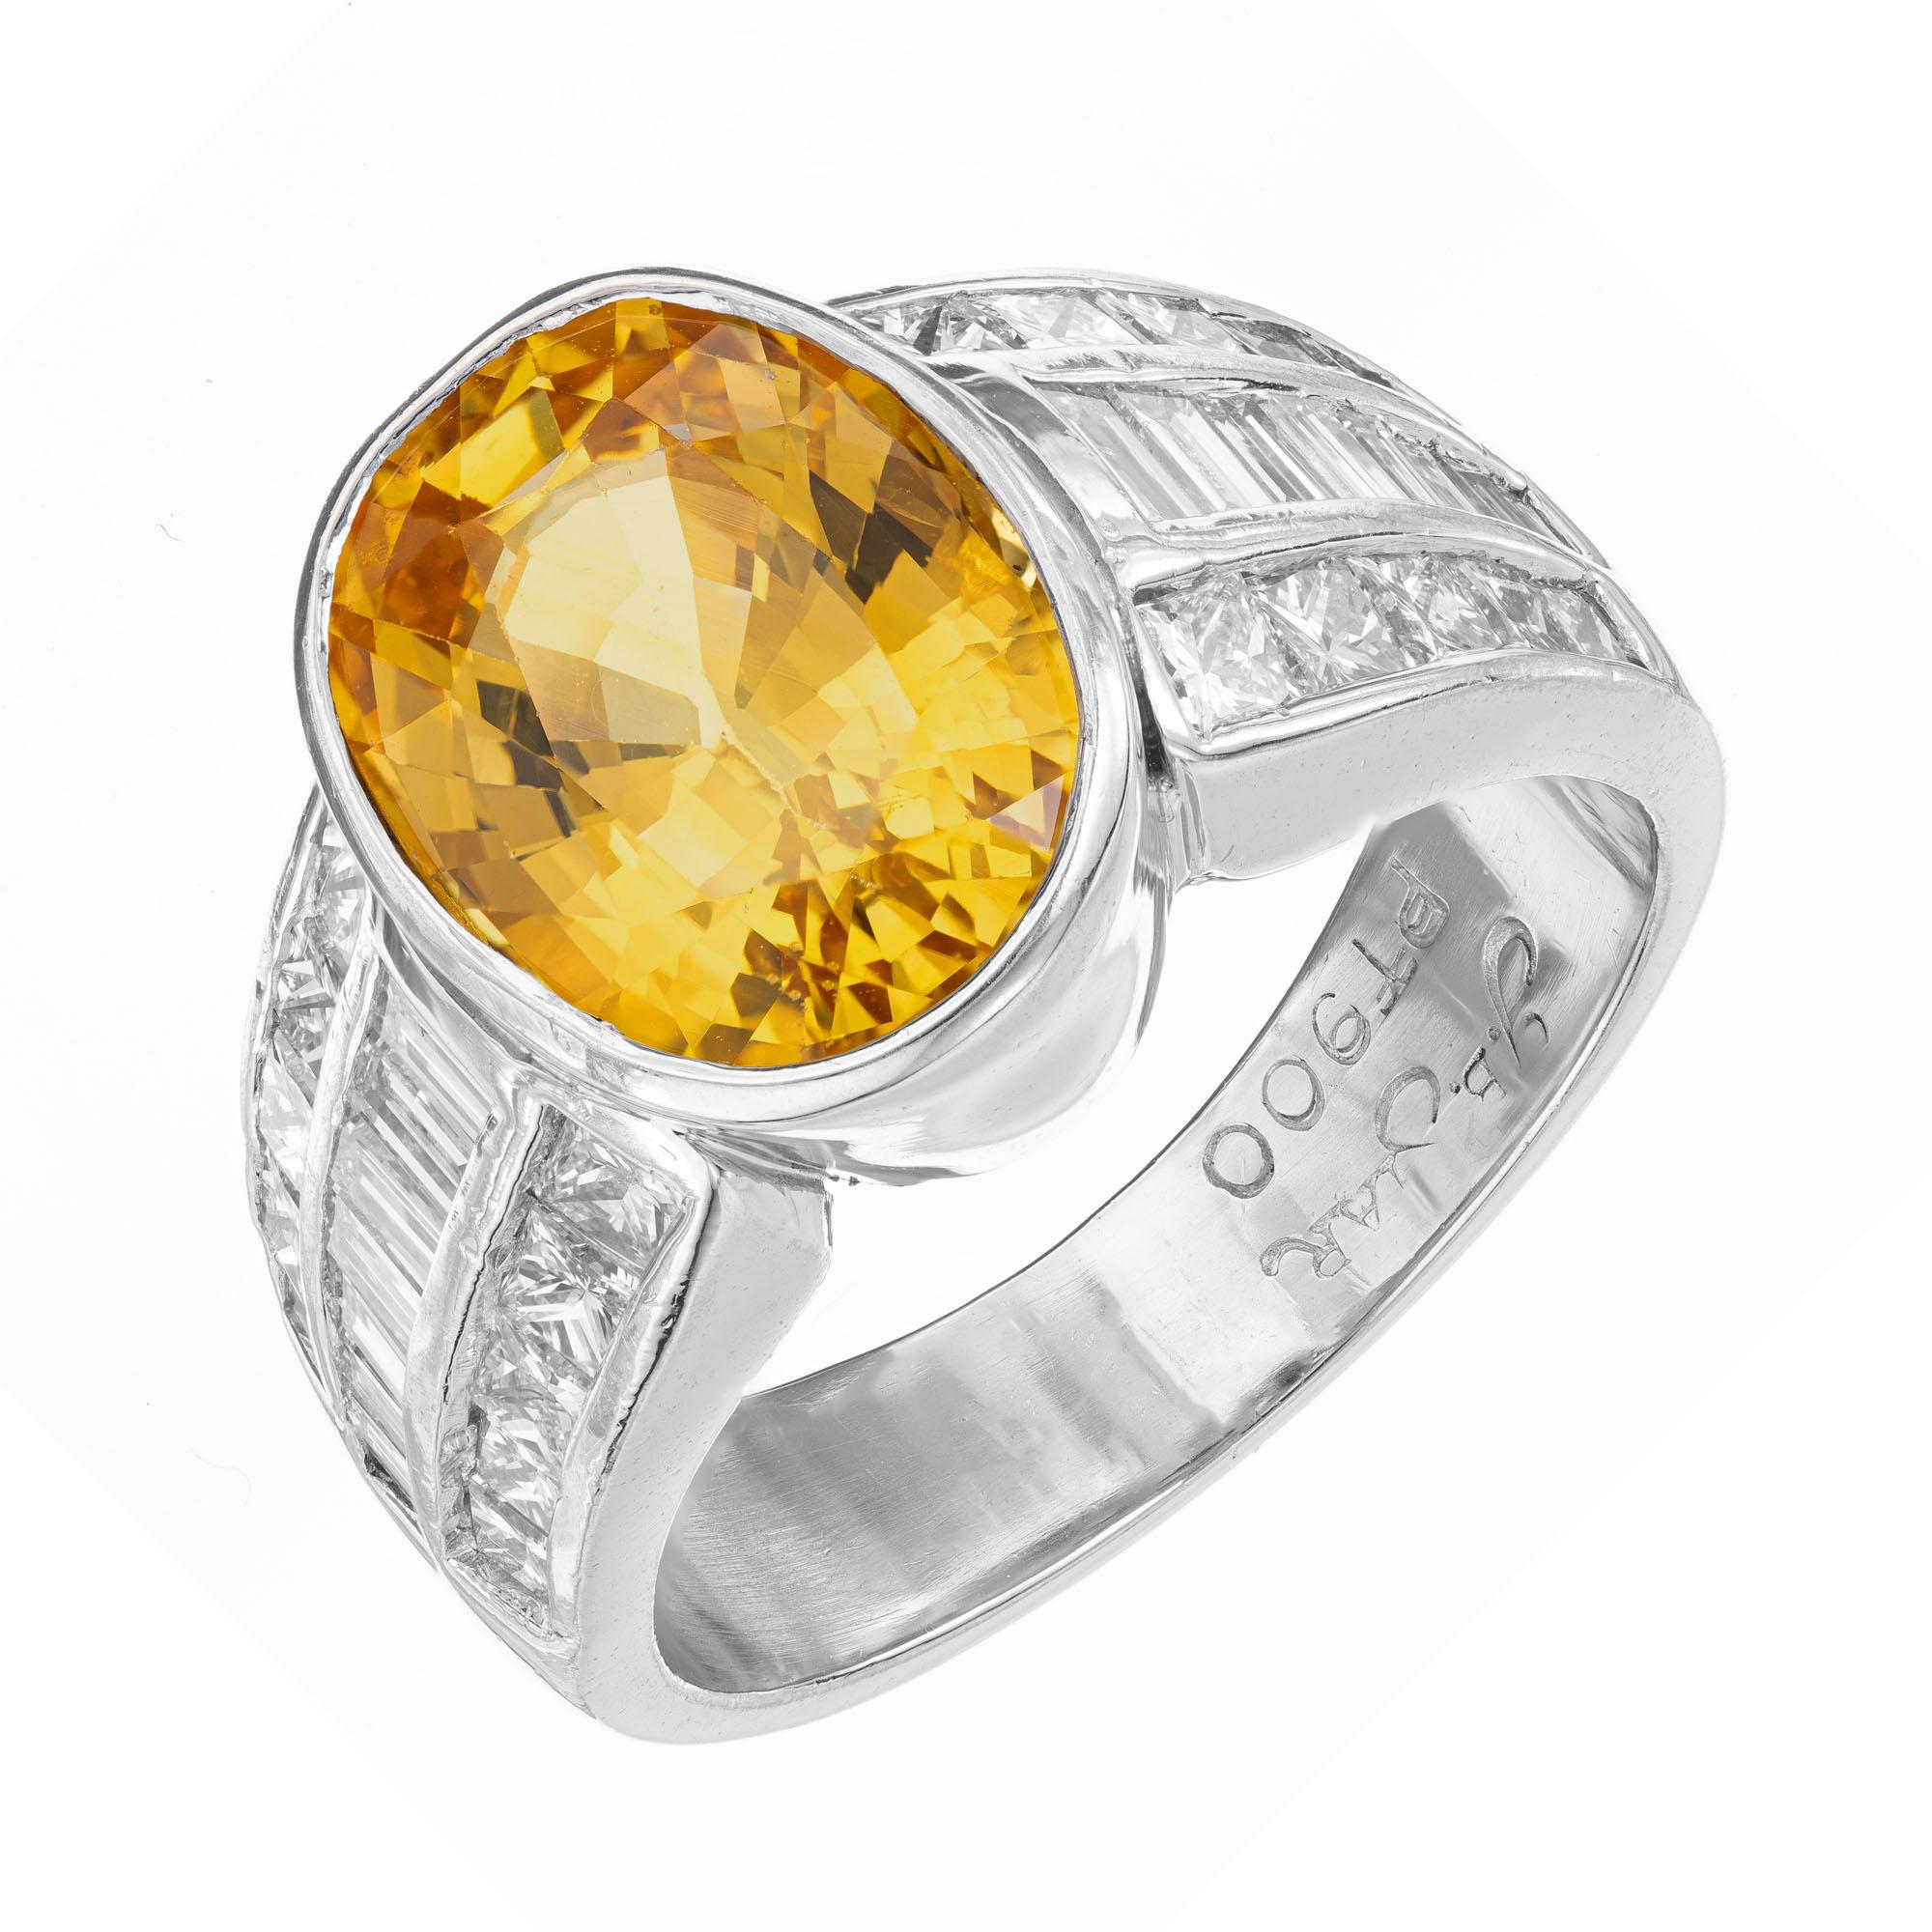 J.B. Star yellow sapphire and diamond engagement ring. GIA certified oval center stone in a platinum setting with baguette and princess cut accent diamonds. 

1 Bright yellow natural corundum Sapphire, approx. total weight 5.29cts, 11.70 x 8.61 x